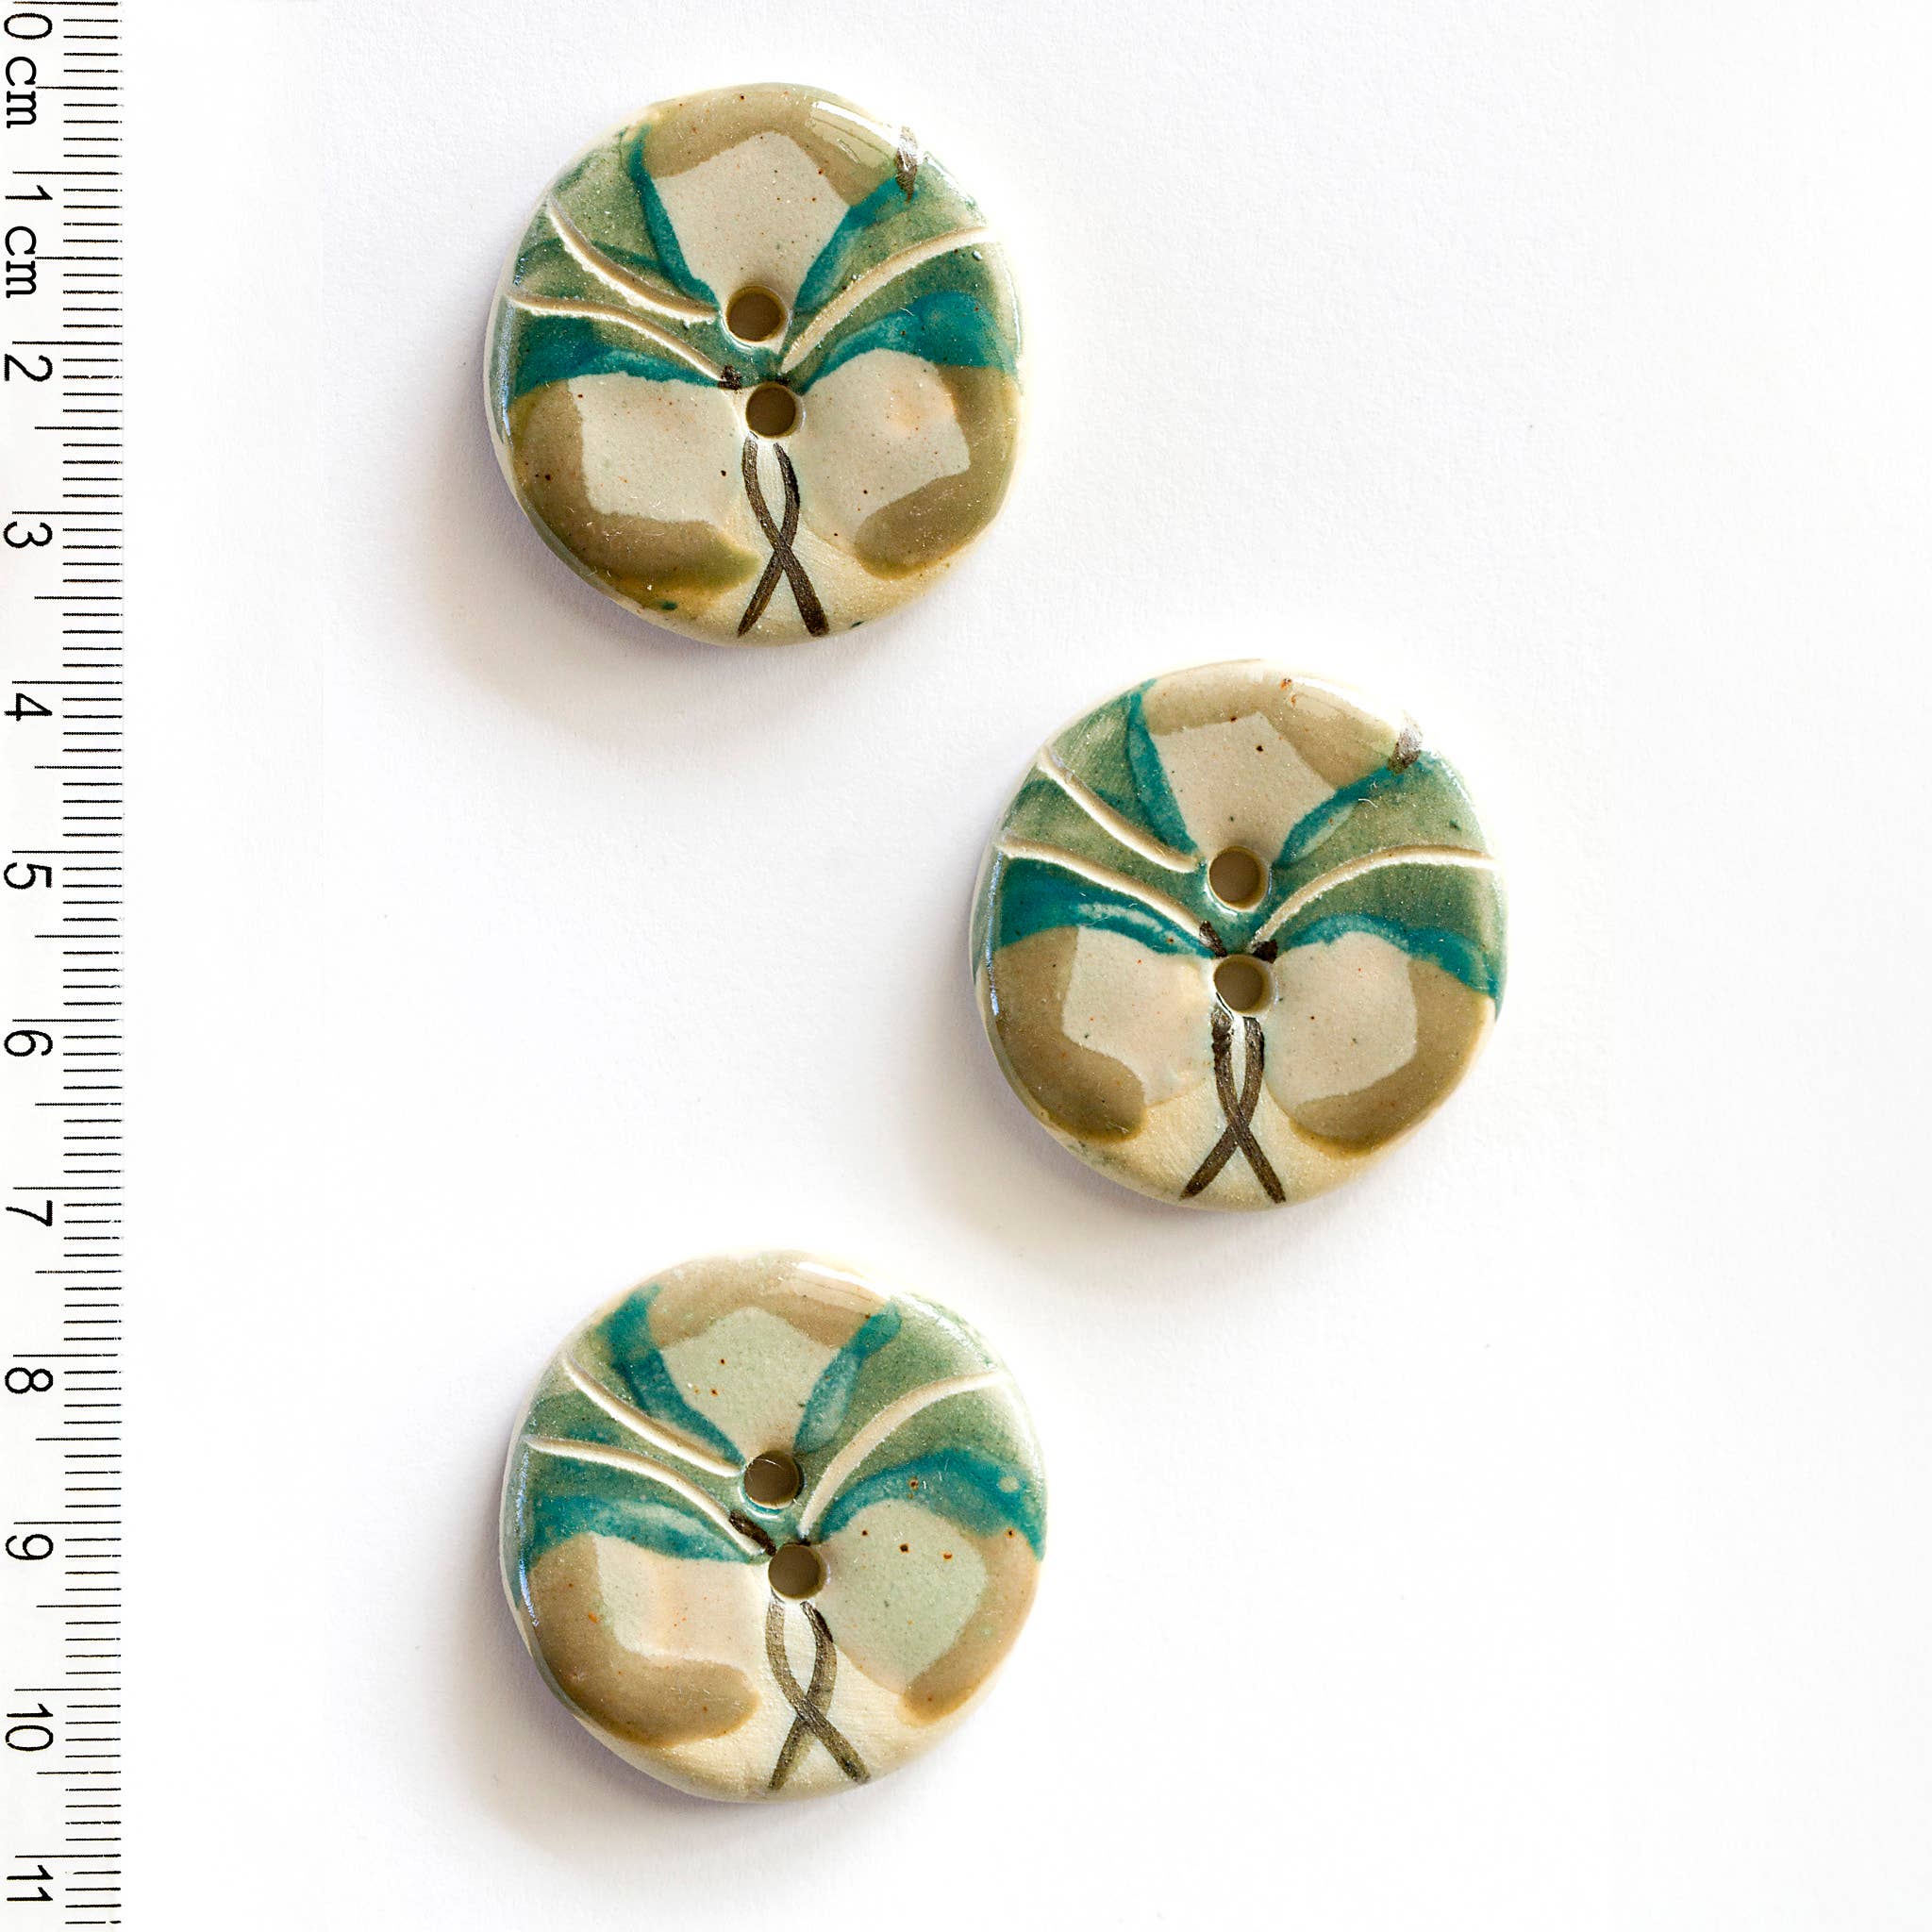 Incomparable Buttons - 3 Green Floral Buttons